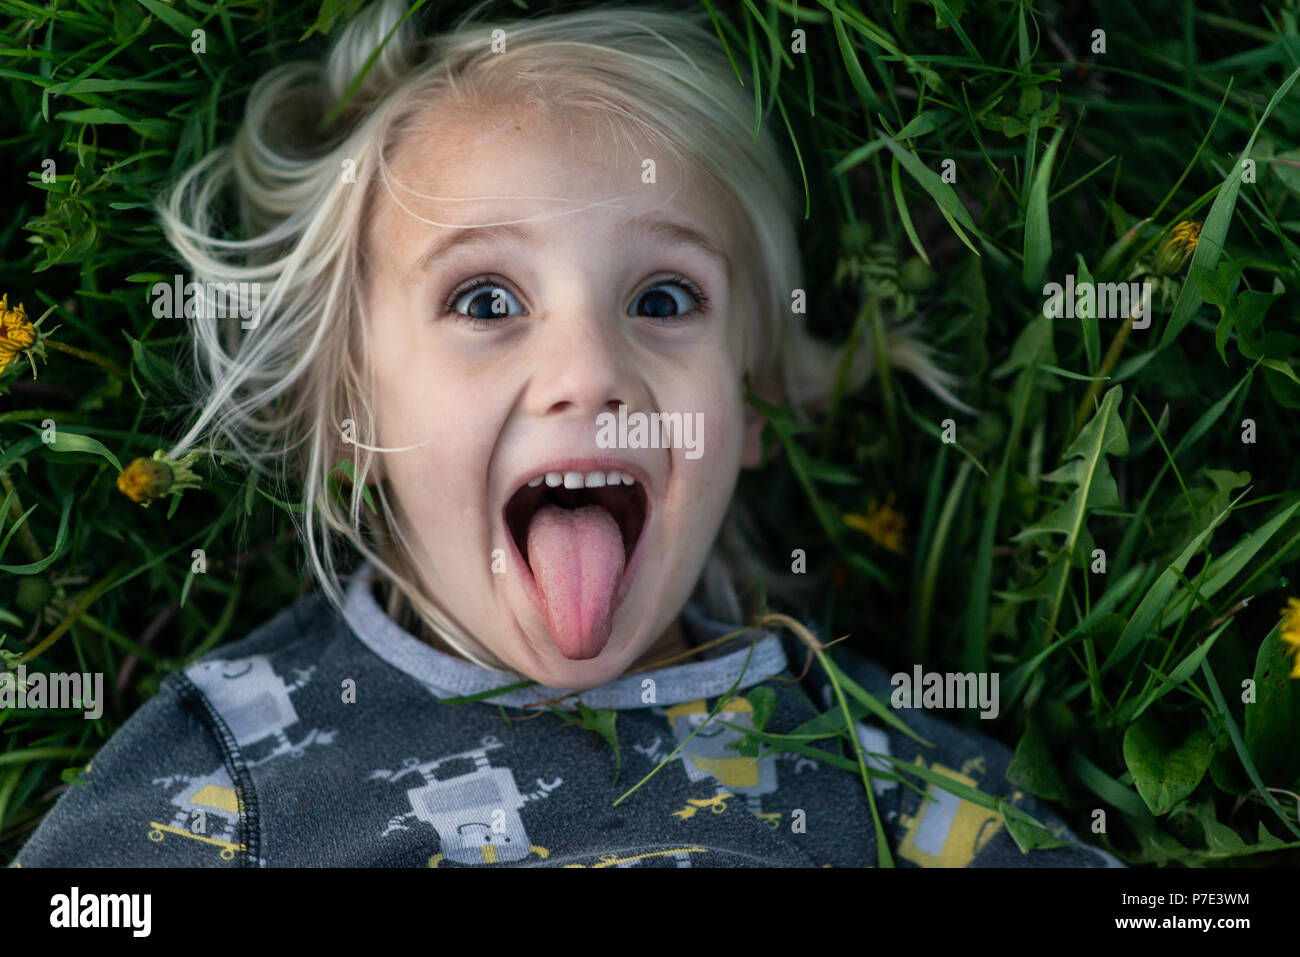 Blond haired boy lying on grass sticking tongue out, portrait Stock Photo